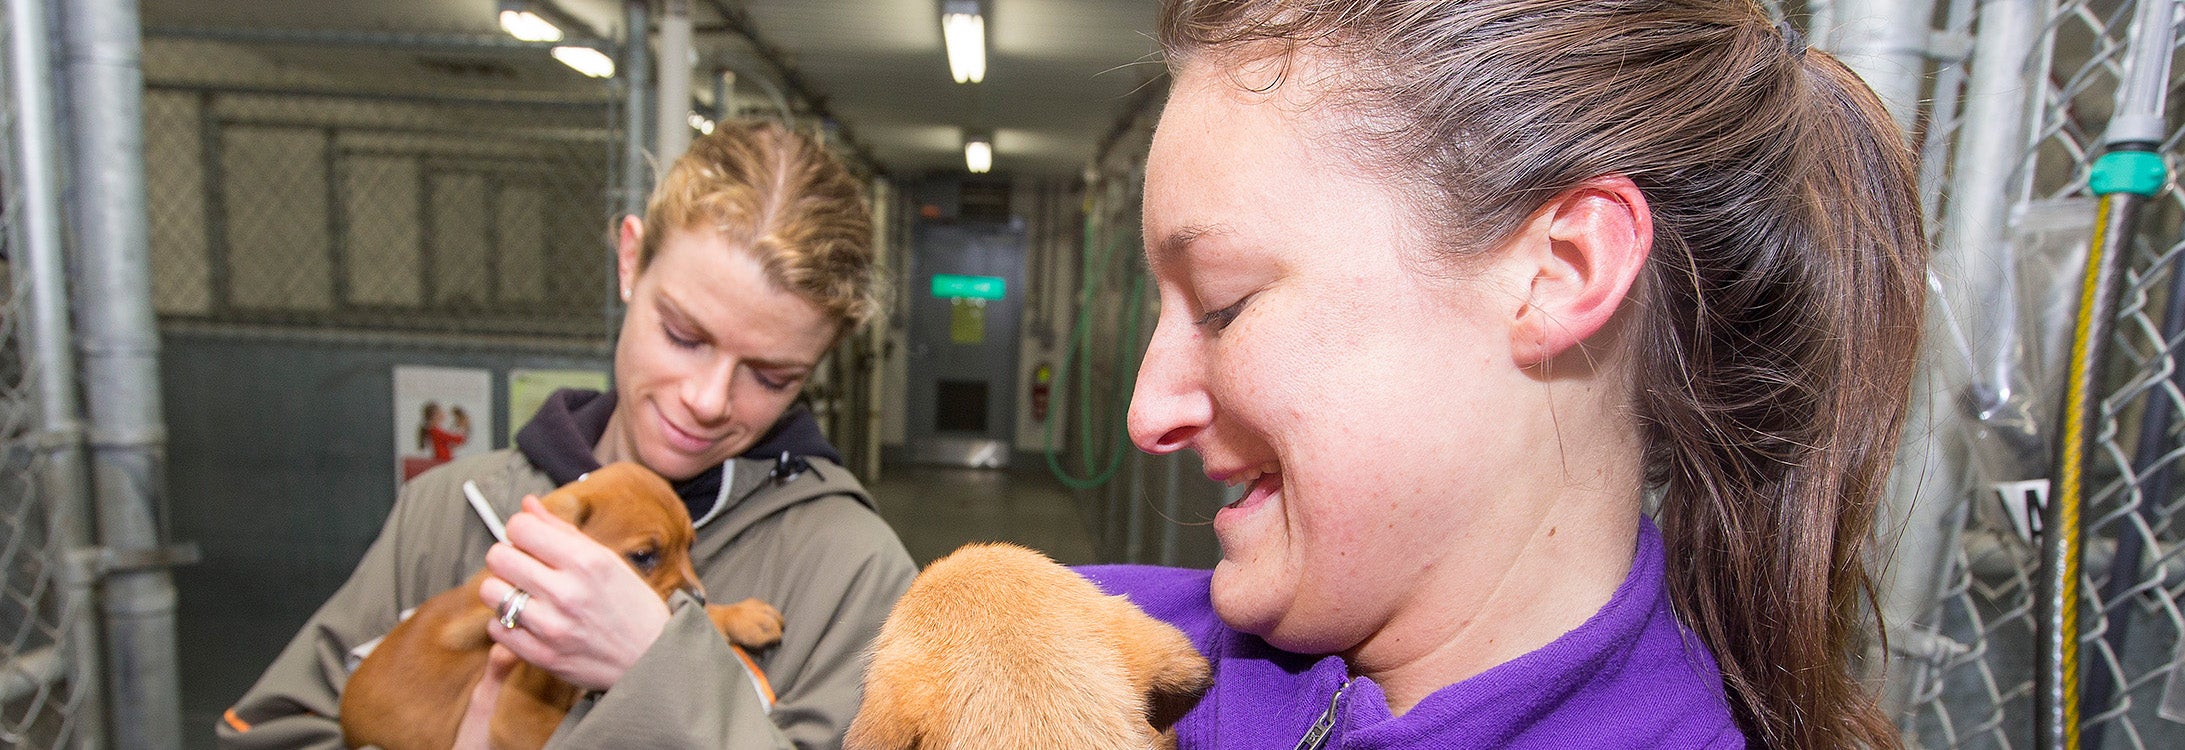 Melanie Sartore-Baldwin, left, smiles as she holds a puppy in 2014 at the Pitt County Animal Shelter during the first year of East Carolina University’s Kinesiology 1010 fitness walking course. (ECU News photos)